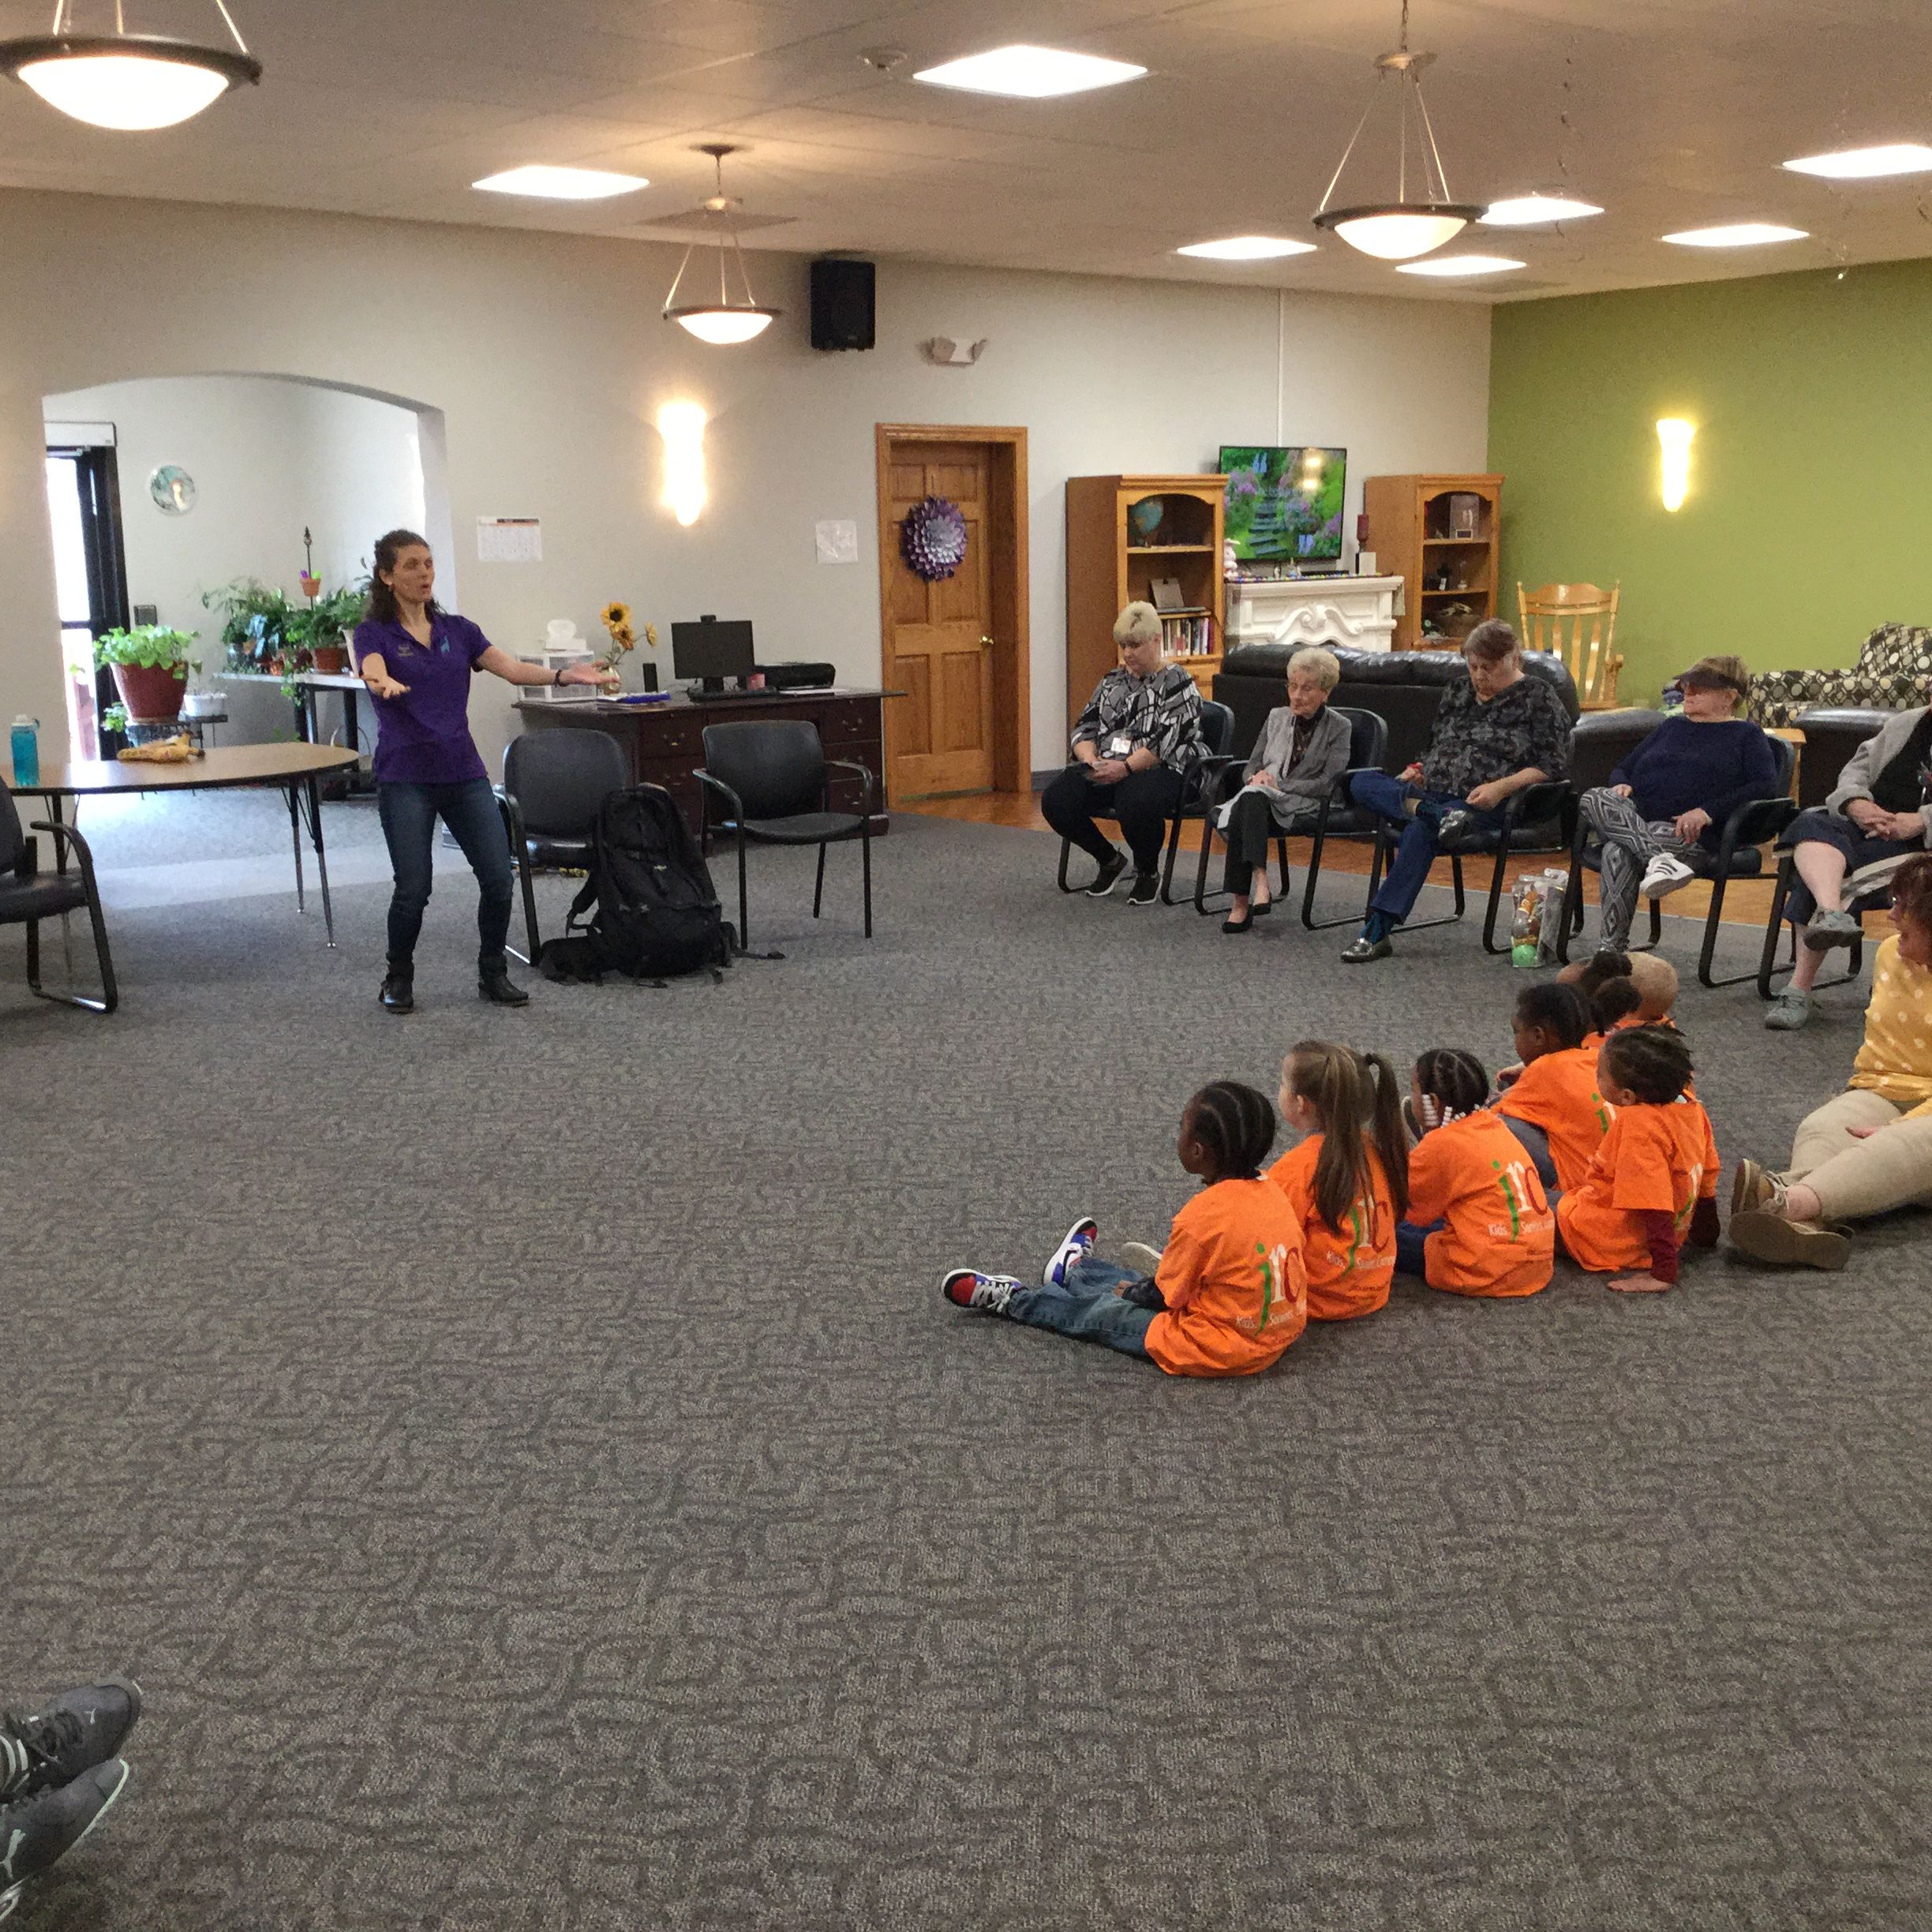 Lindsay Bonilla, Storyteller and Author describes the Intergenerational Connections Program of Storytelling for the day as she chooses her actors from both the children and senior/members.  The balance of the group will be asked to actively participate.